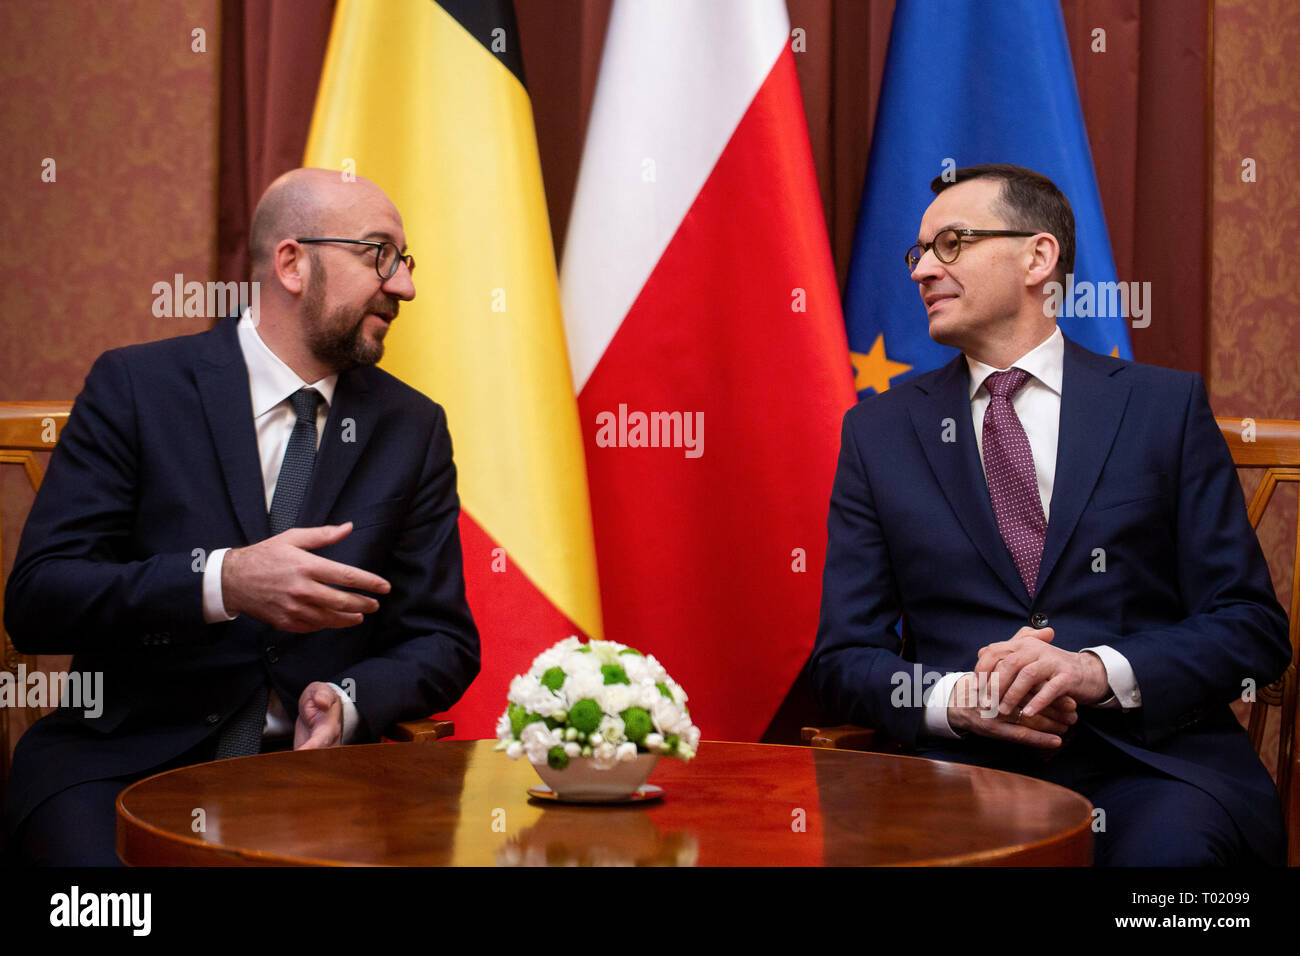 Prime Minister of Belgium Charles Michel and Prime Minister of Poland Mateusz Morawiecki during the meeting in Warsaw, Poland on 12 March 2019 Stock Photo